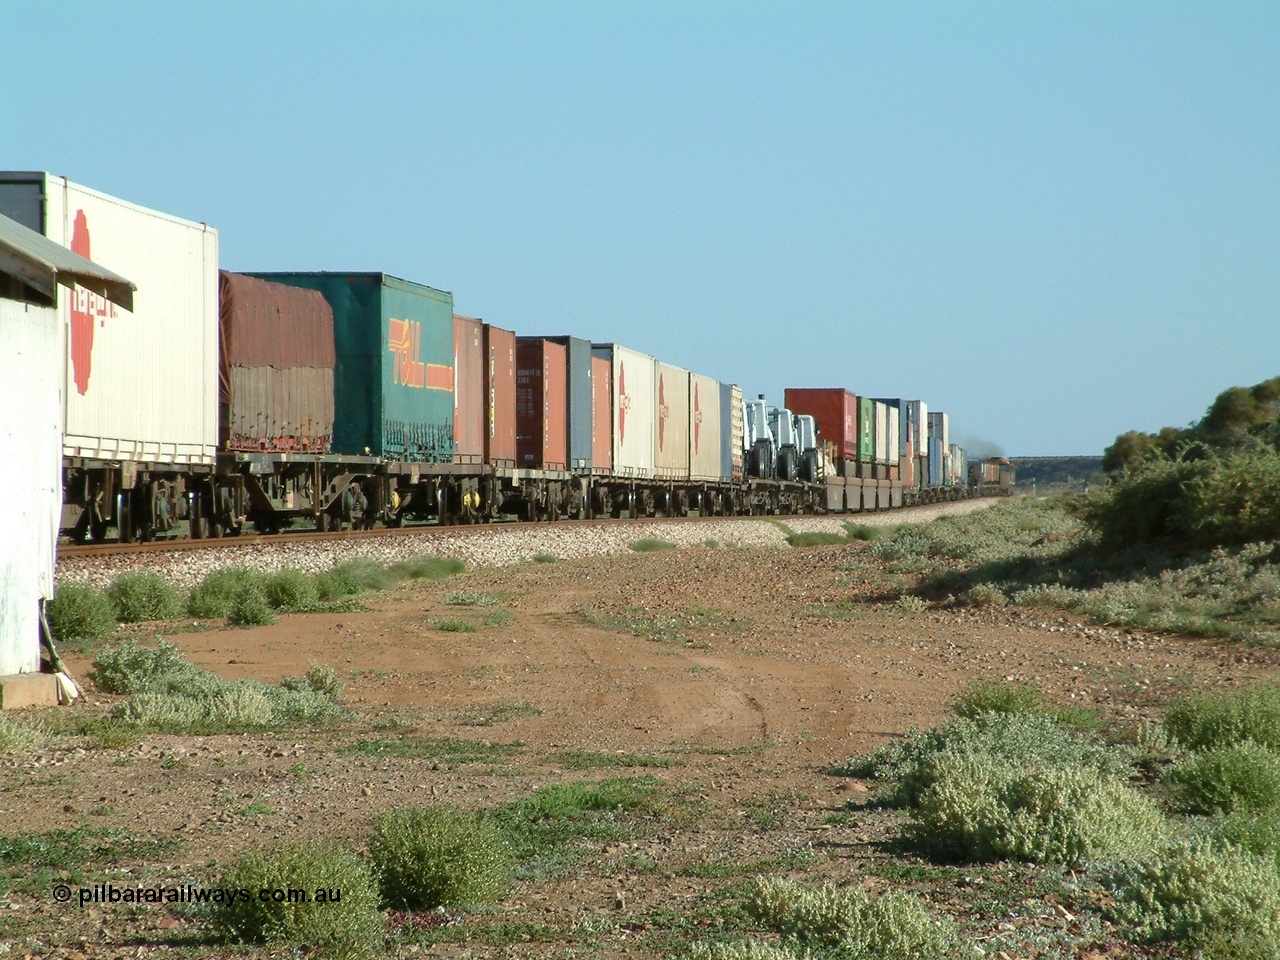 030404 082909
Port Germein, Perth bound steel and intermodal hurries through on the main behind National Rail's NR class units, showing one and a half stacking and new vehicles on flat waggons. 4th April 2003.
